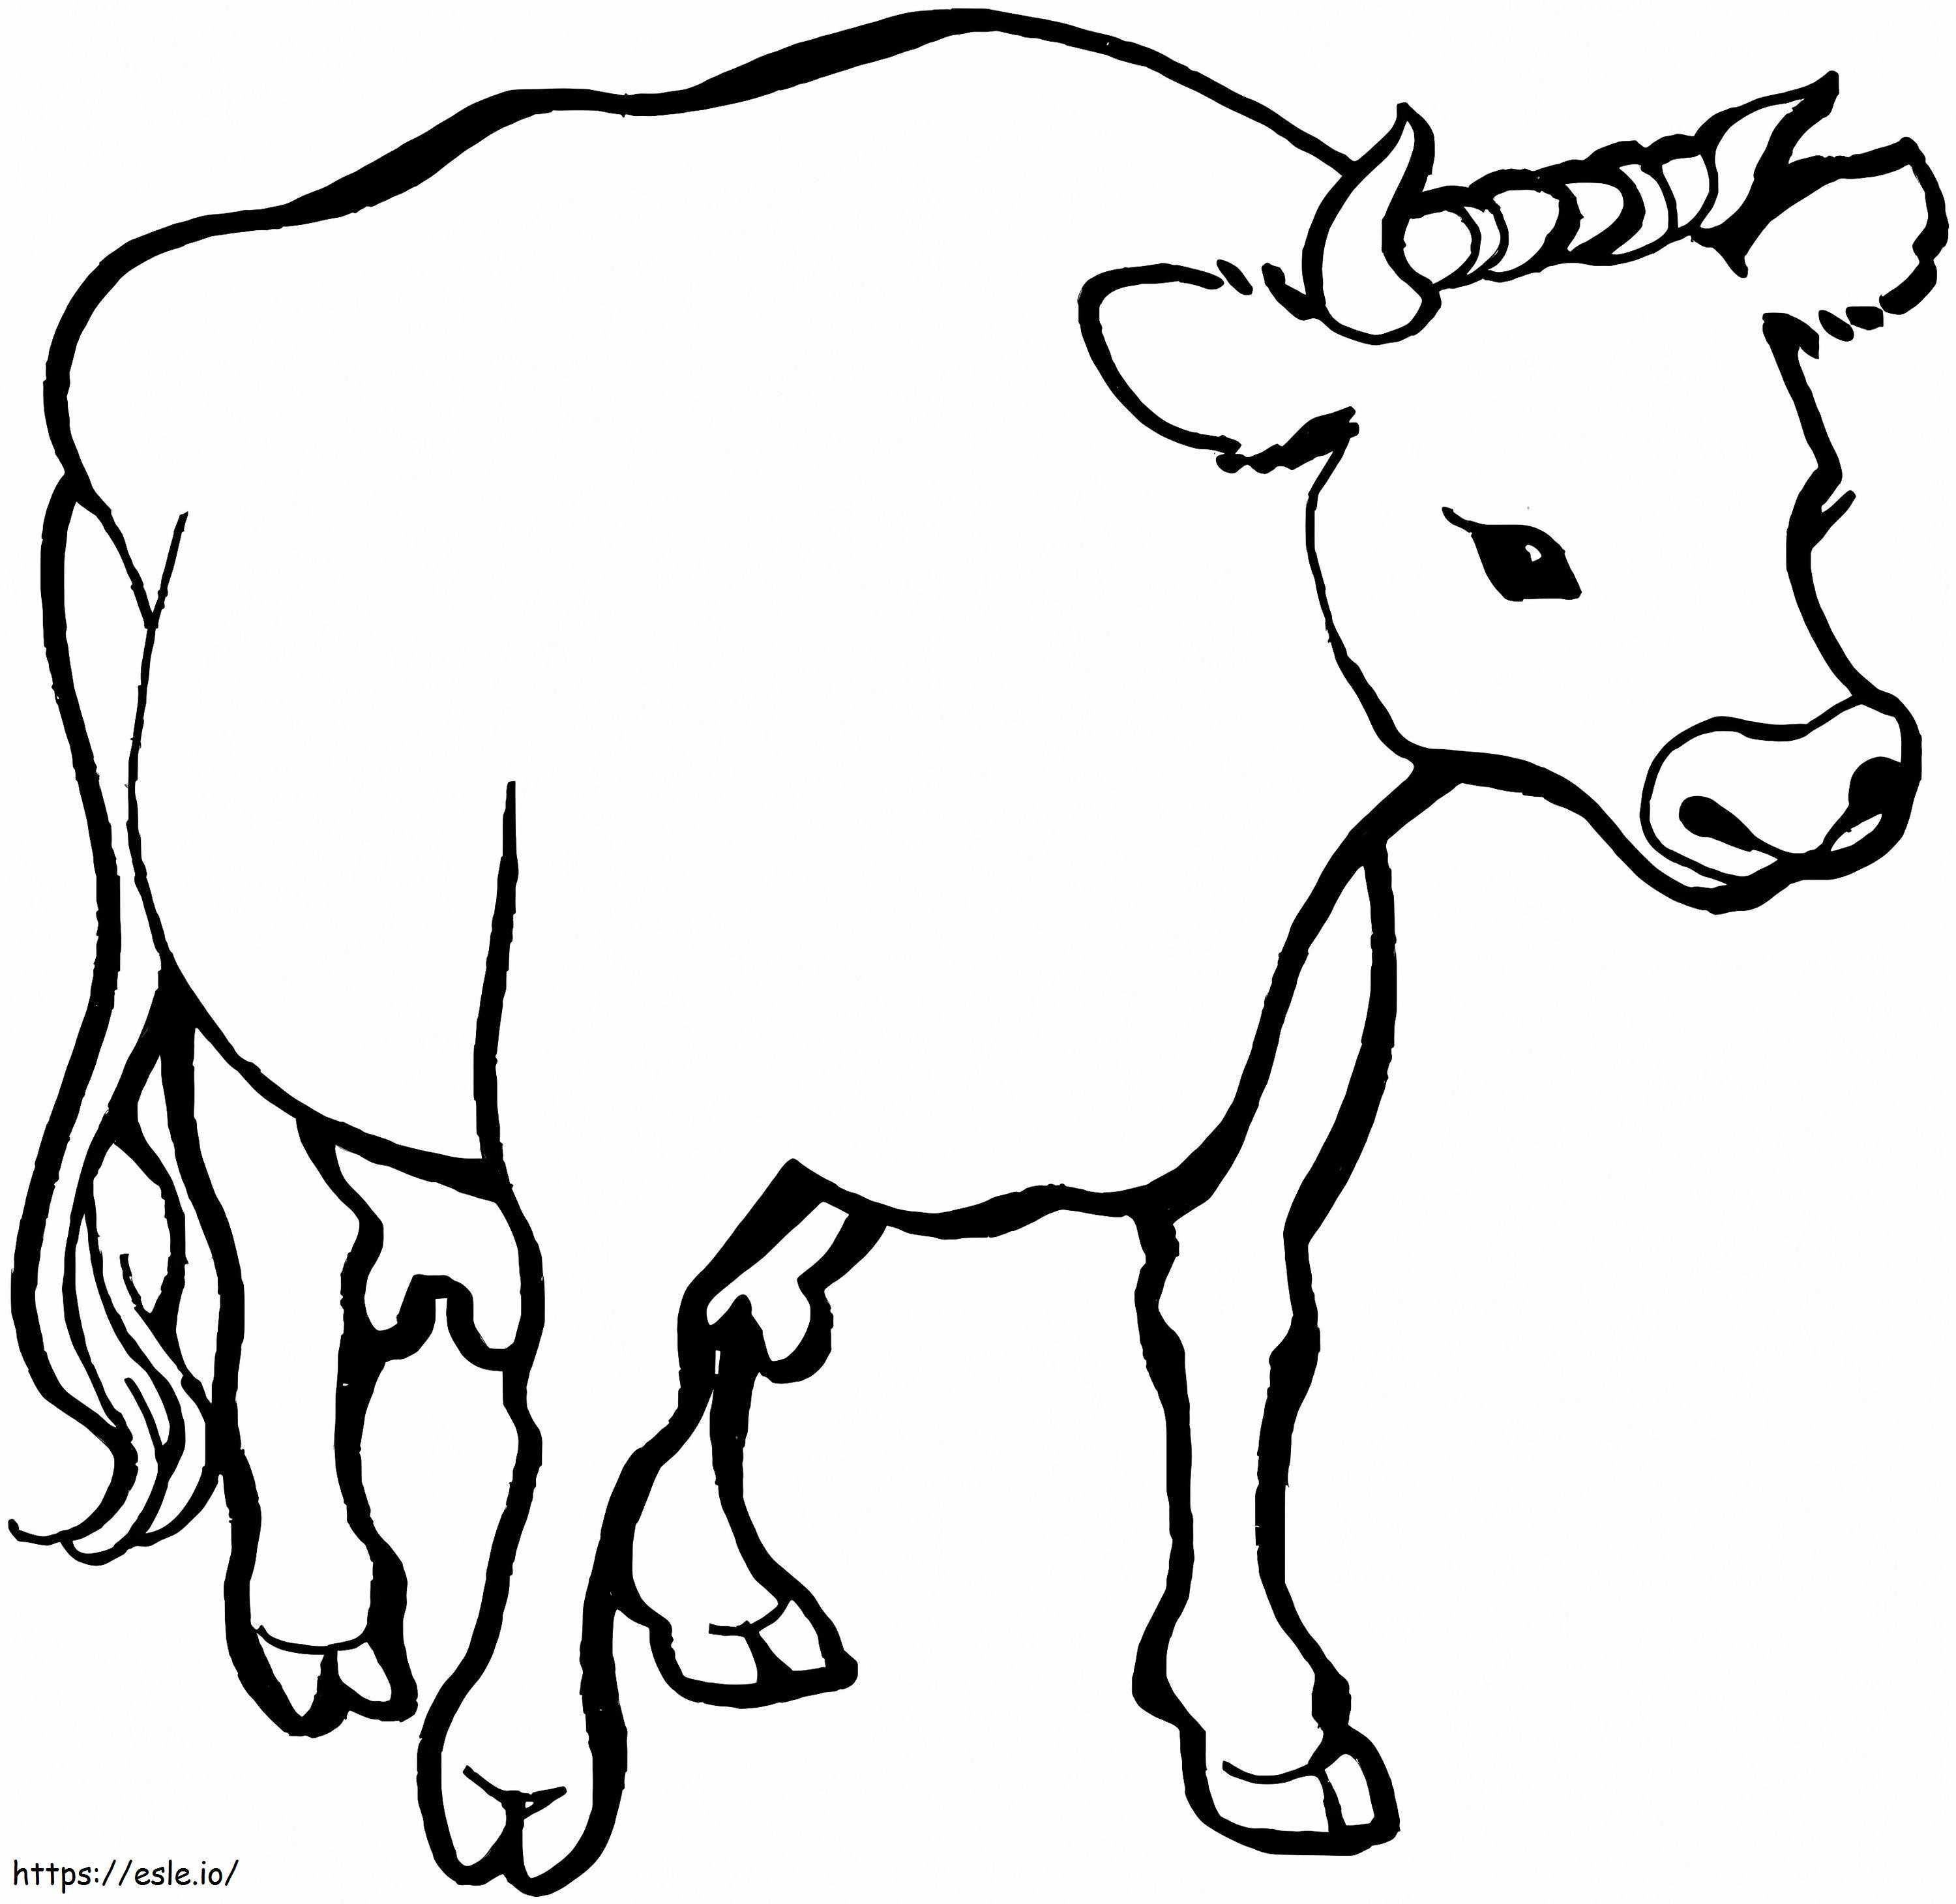 A Cow coloring page